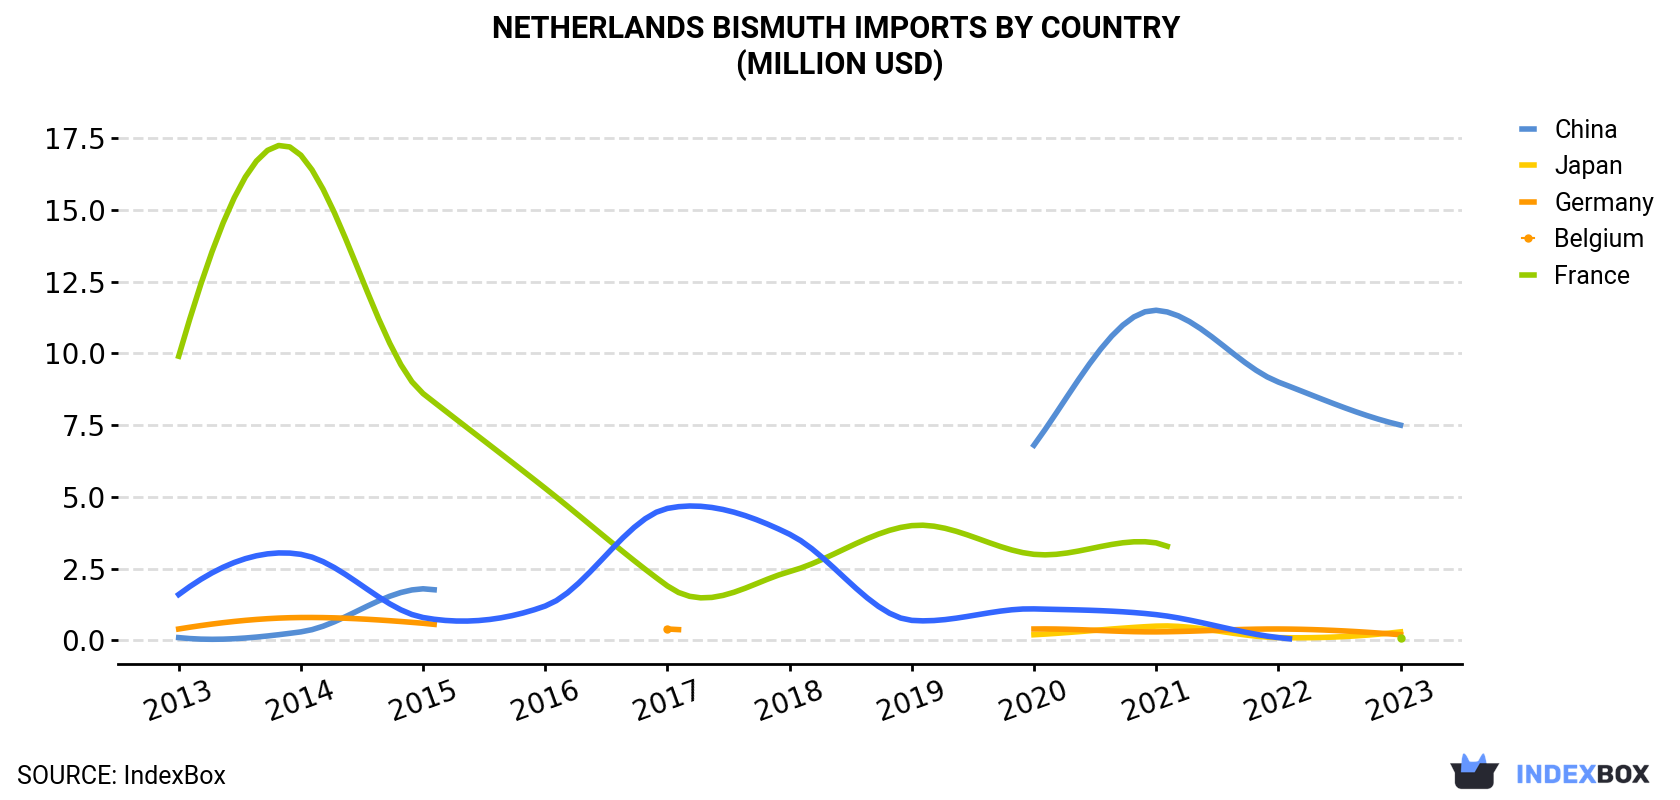 Netherlands Bismuth Imports By Country (Million USD)